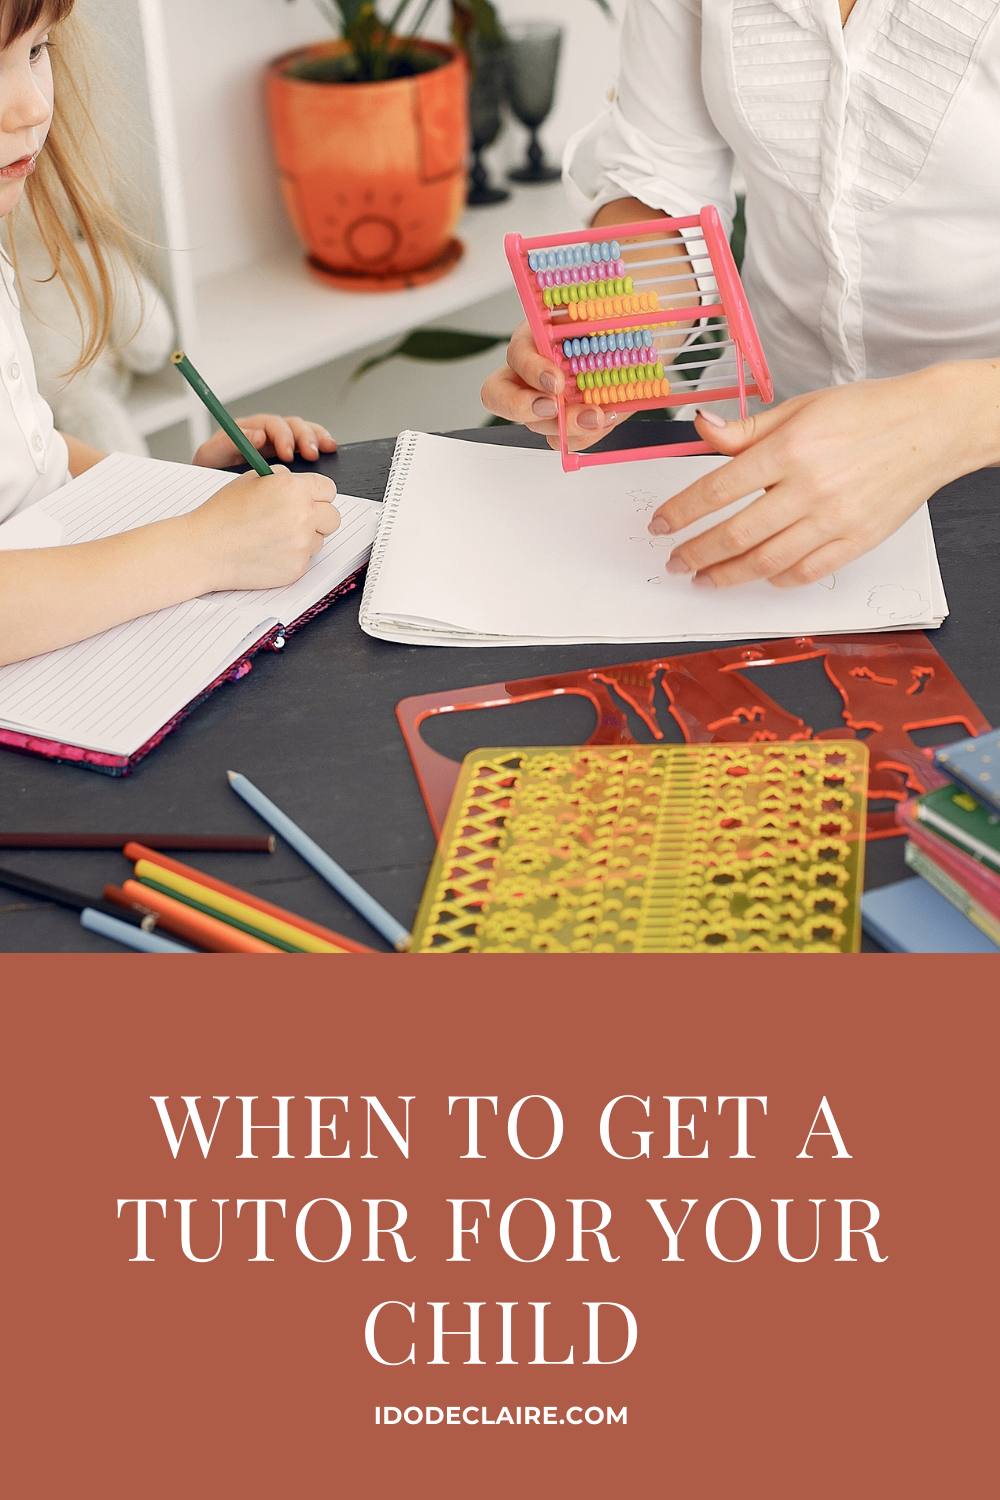 When to Get a Tutor for Your Child